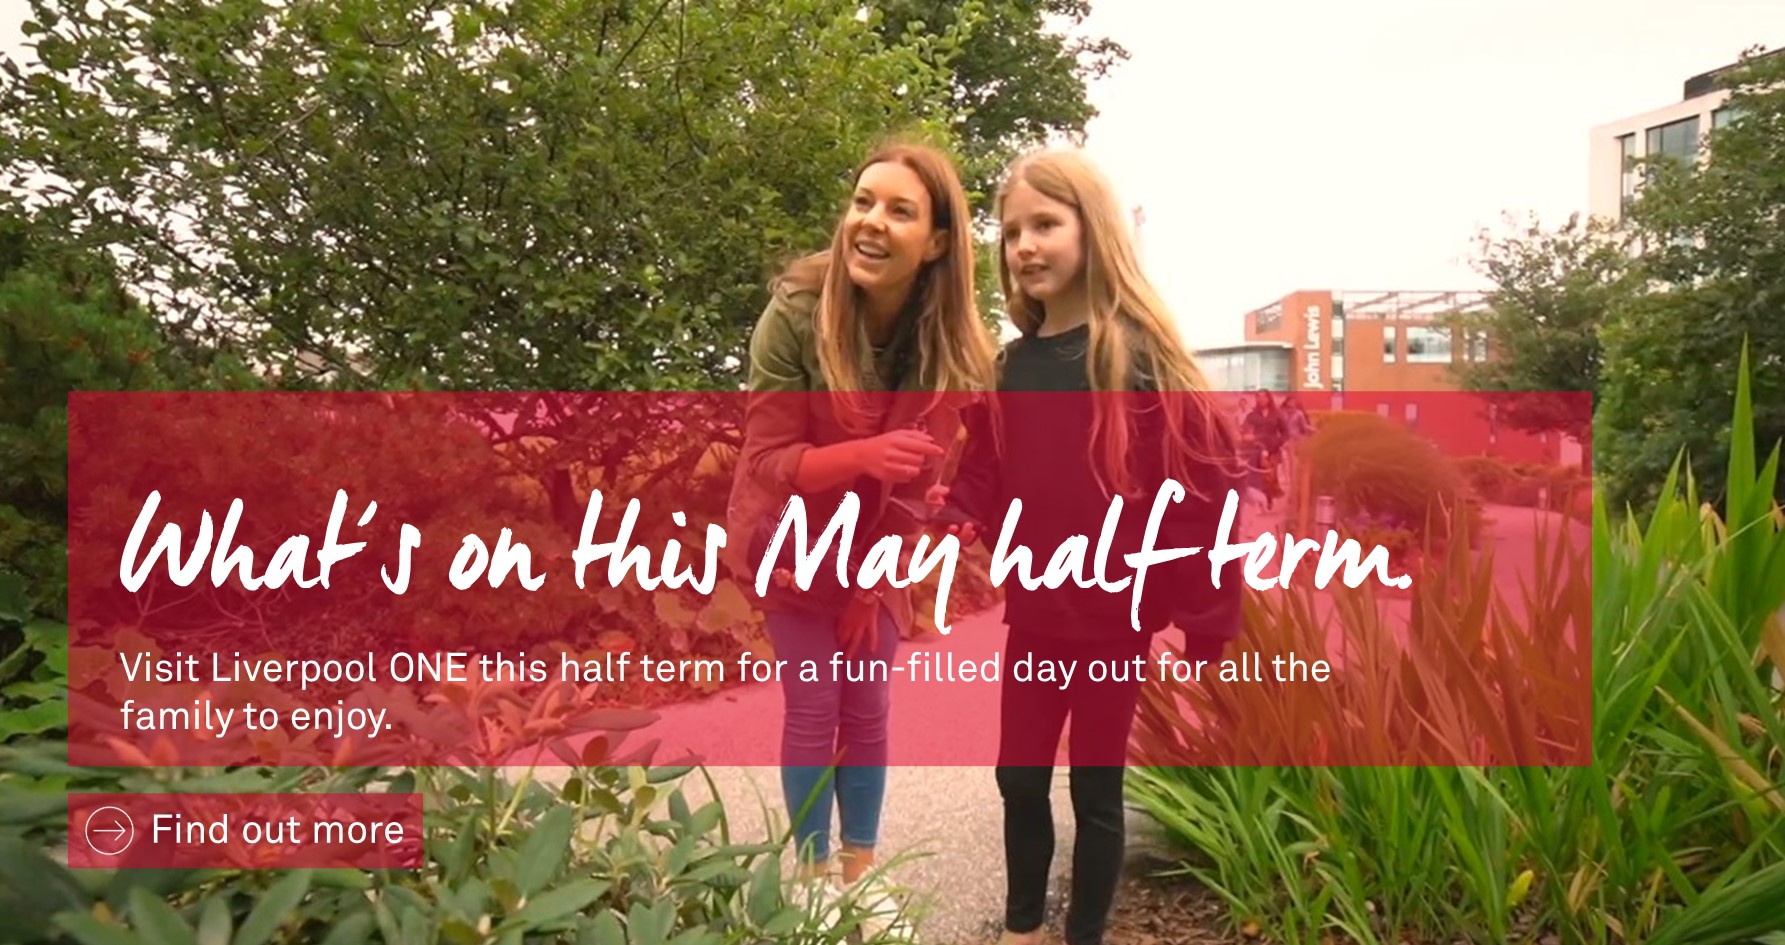 What's on this may half term